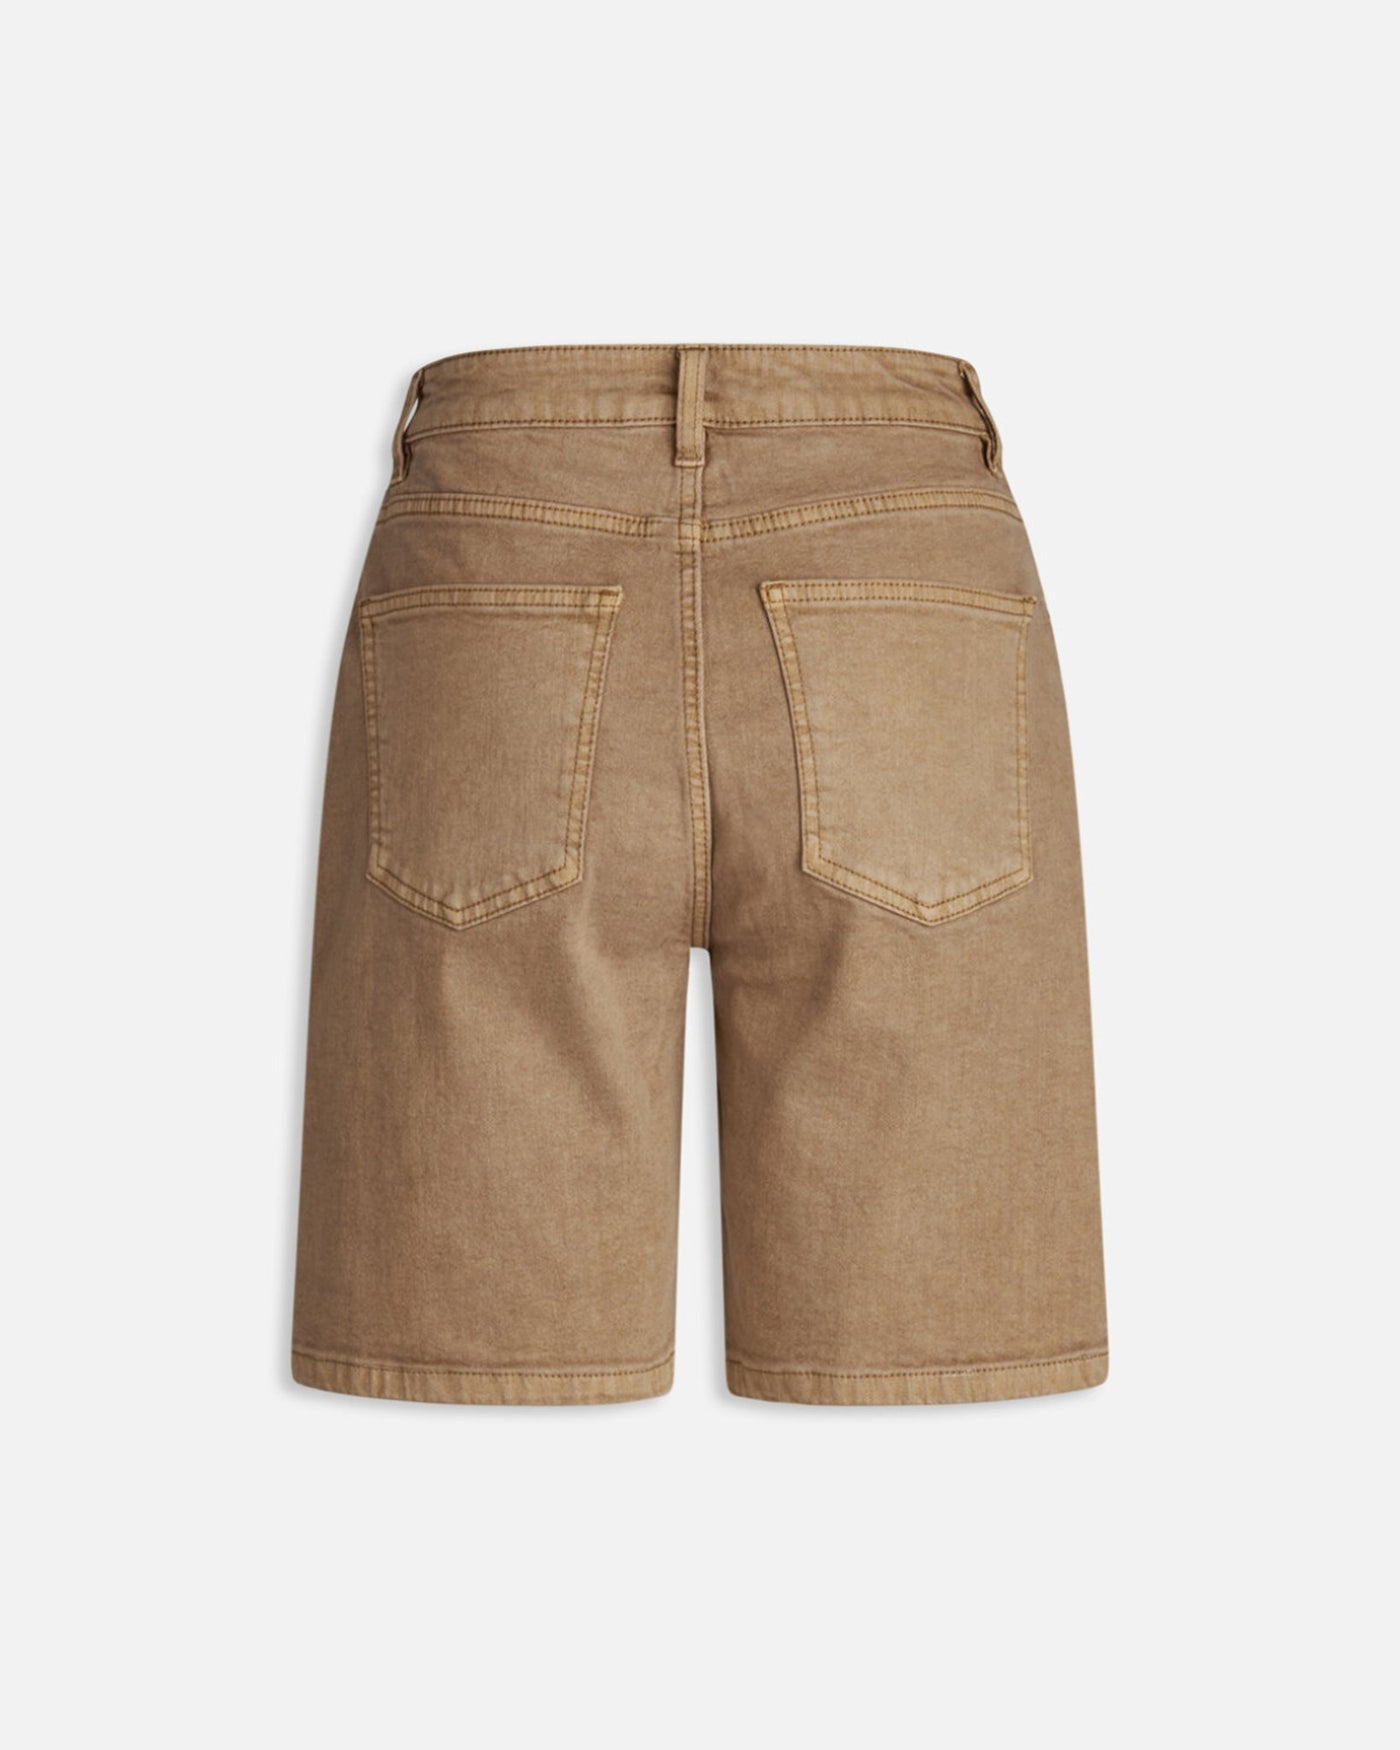 Owi Shorts - Sand - Sisters Point 6